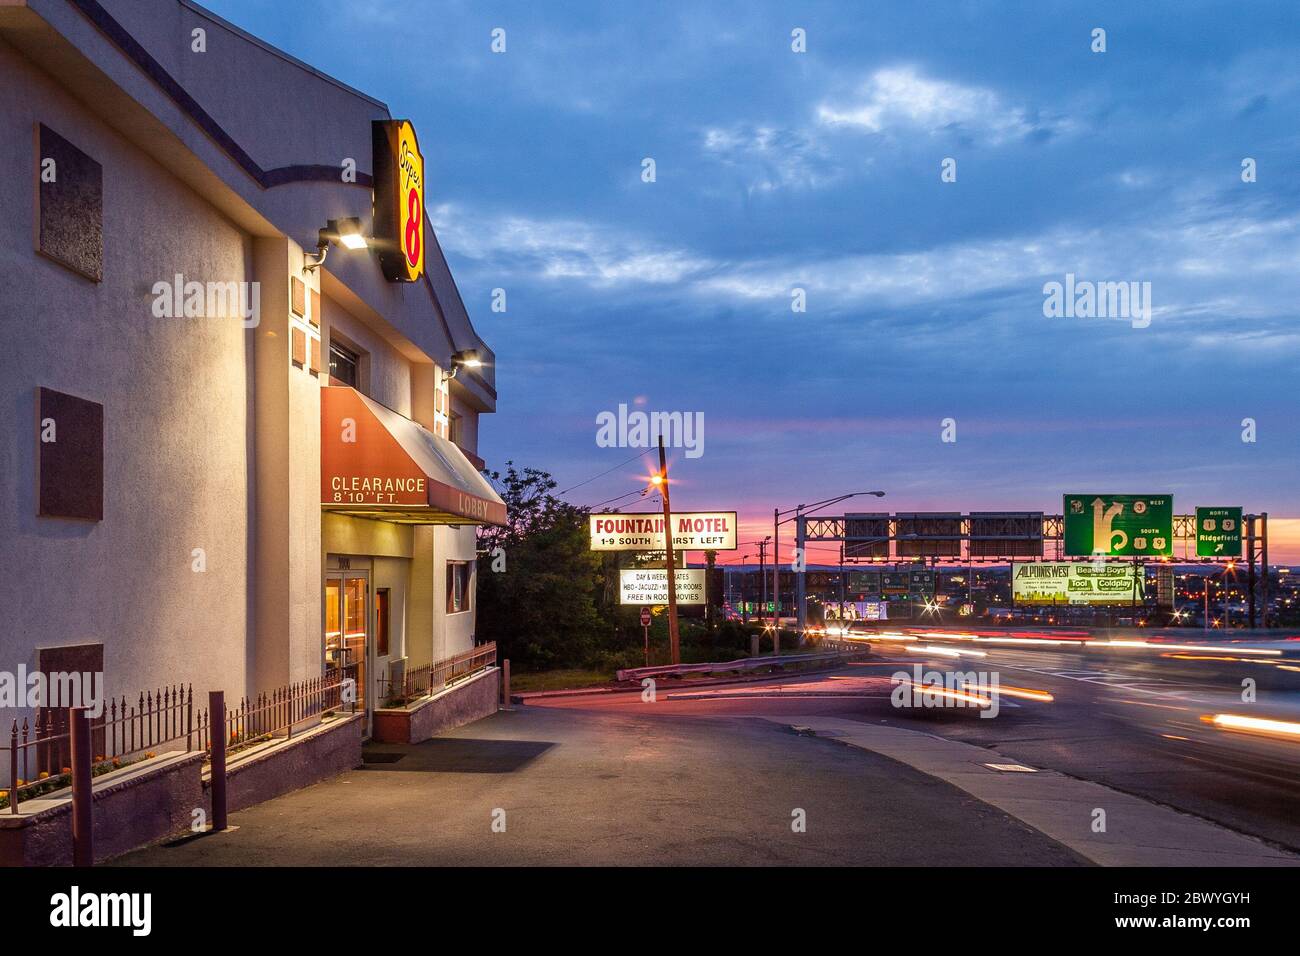 Motels along New Jersey Route 495 at dusk Stock Photo